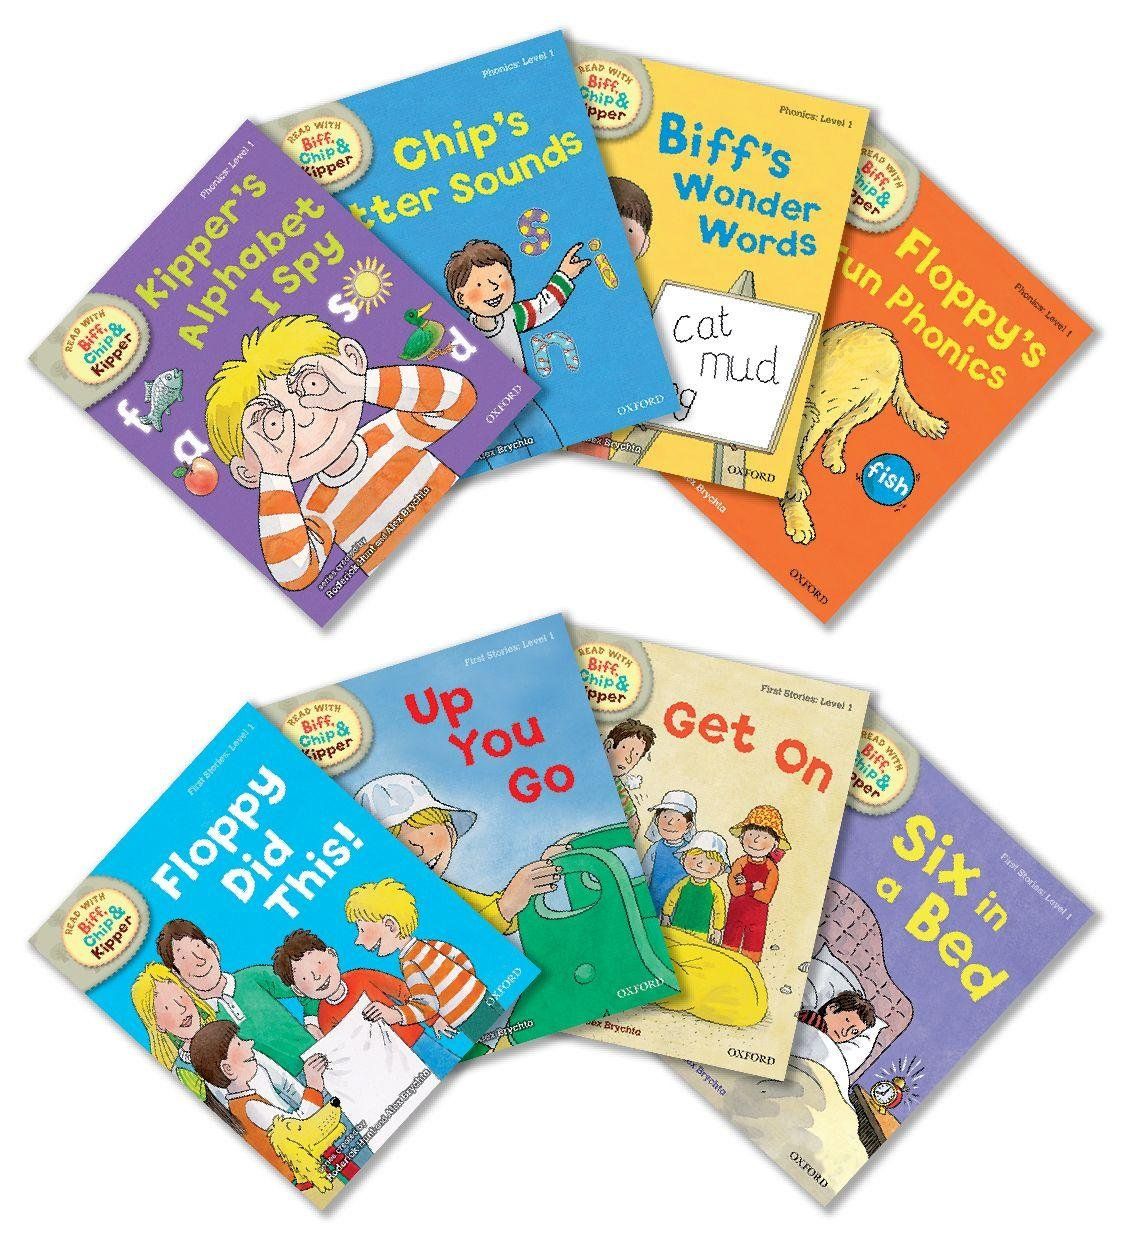 biff chip and kipper collection